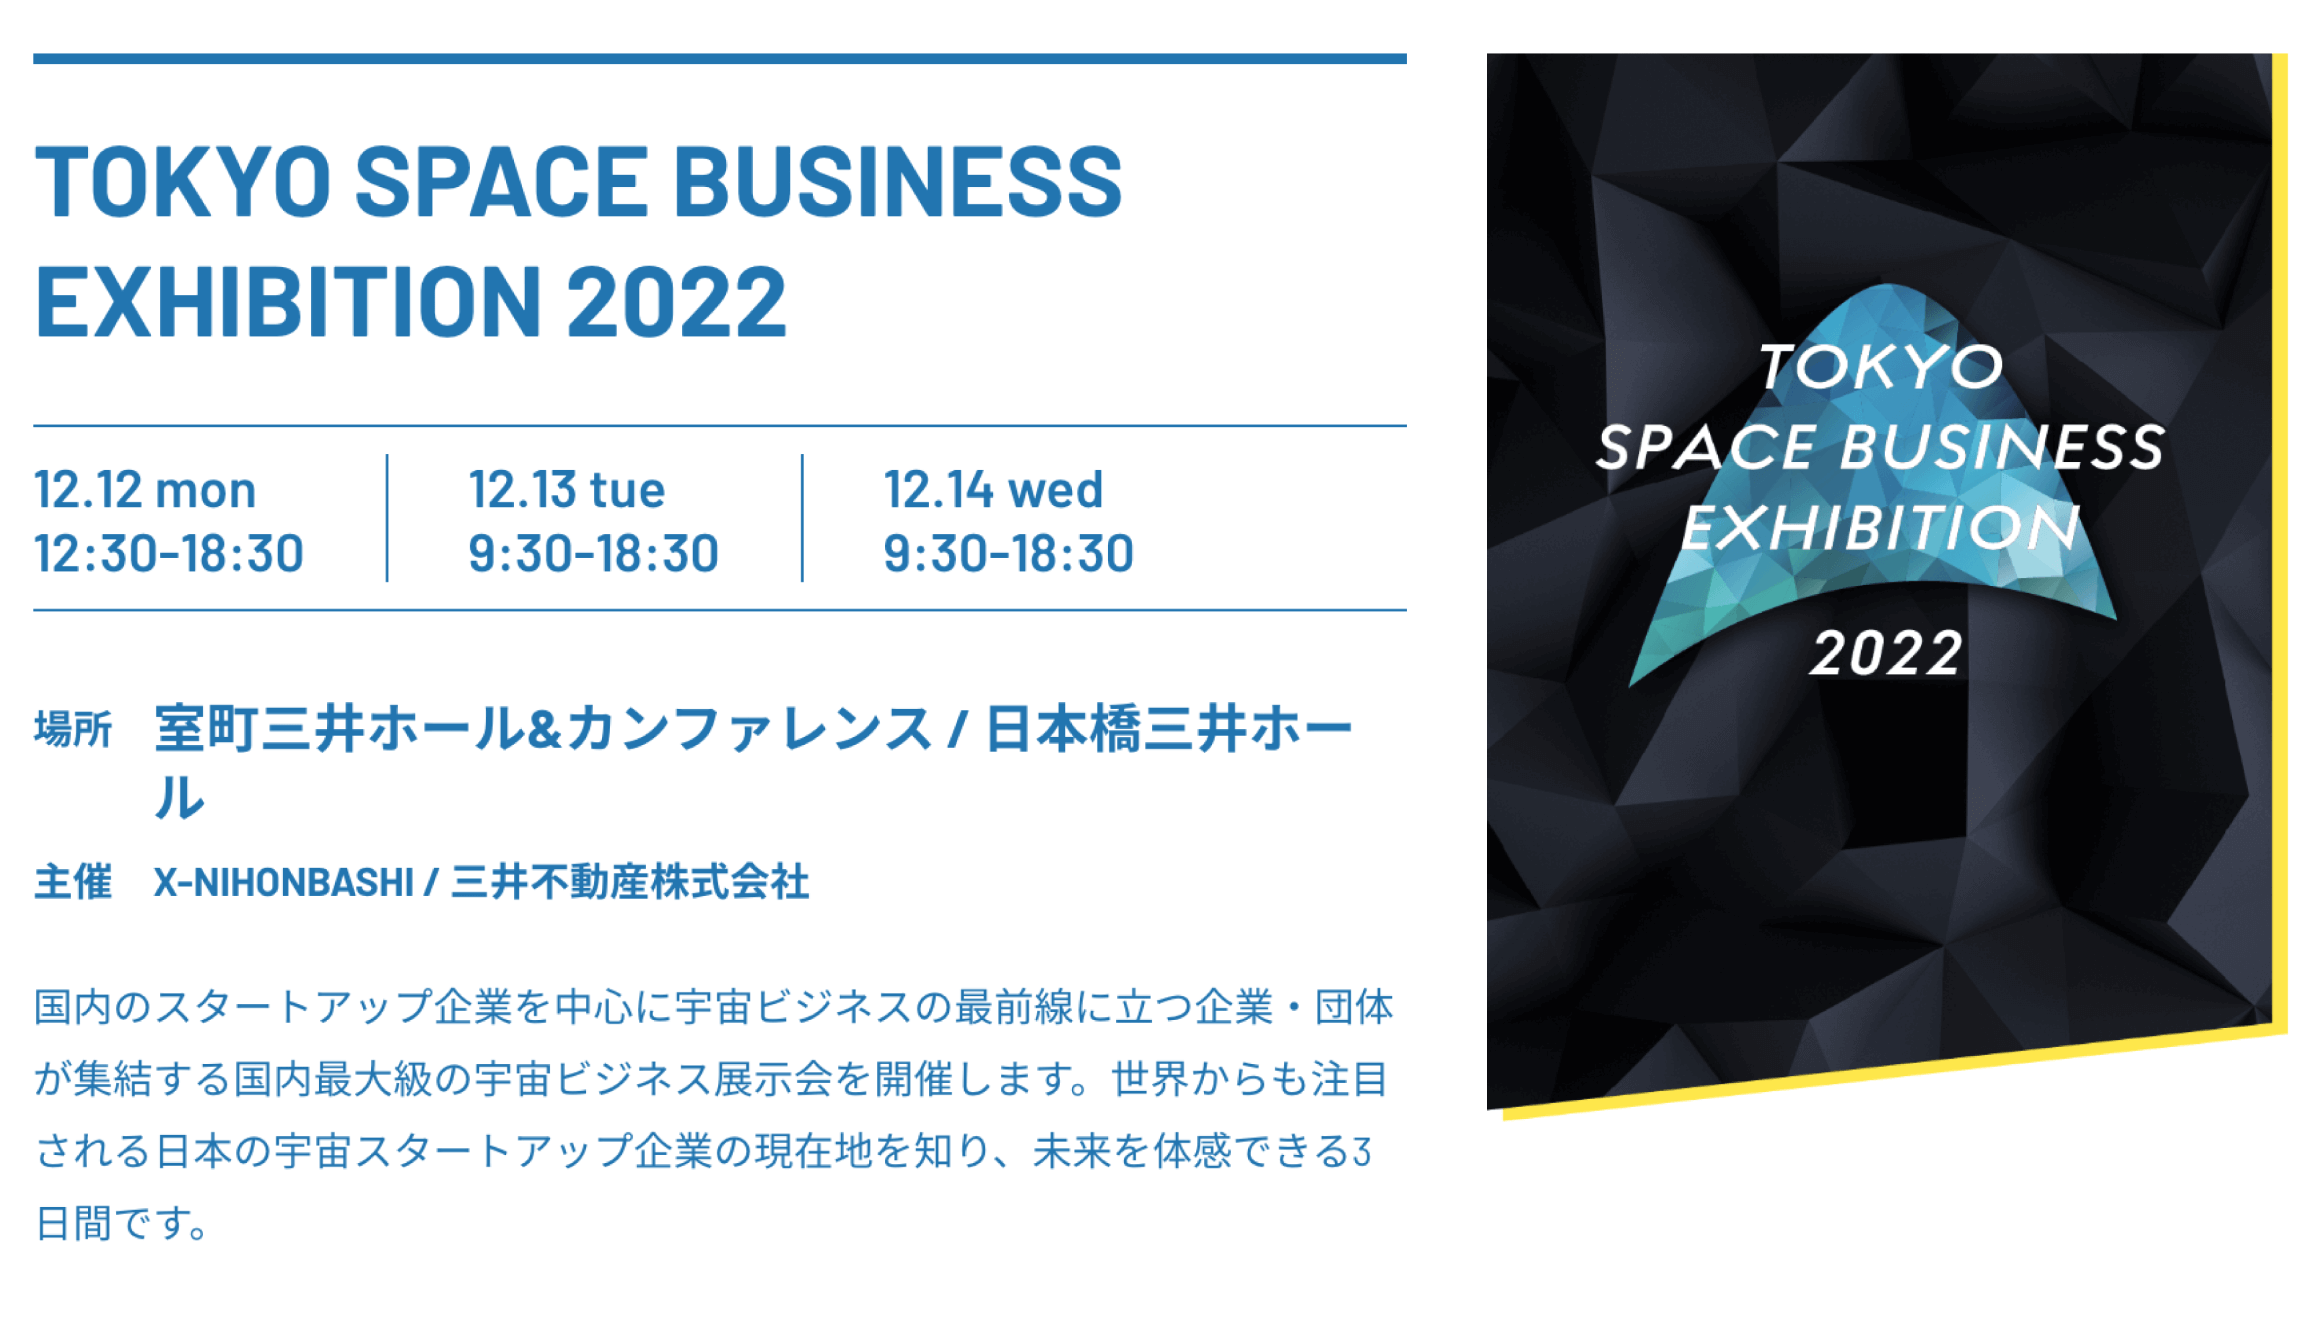 TOKYO SPACE BUSINESS EXHIBITION 2022 ブース出展決定！